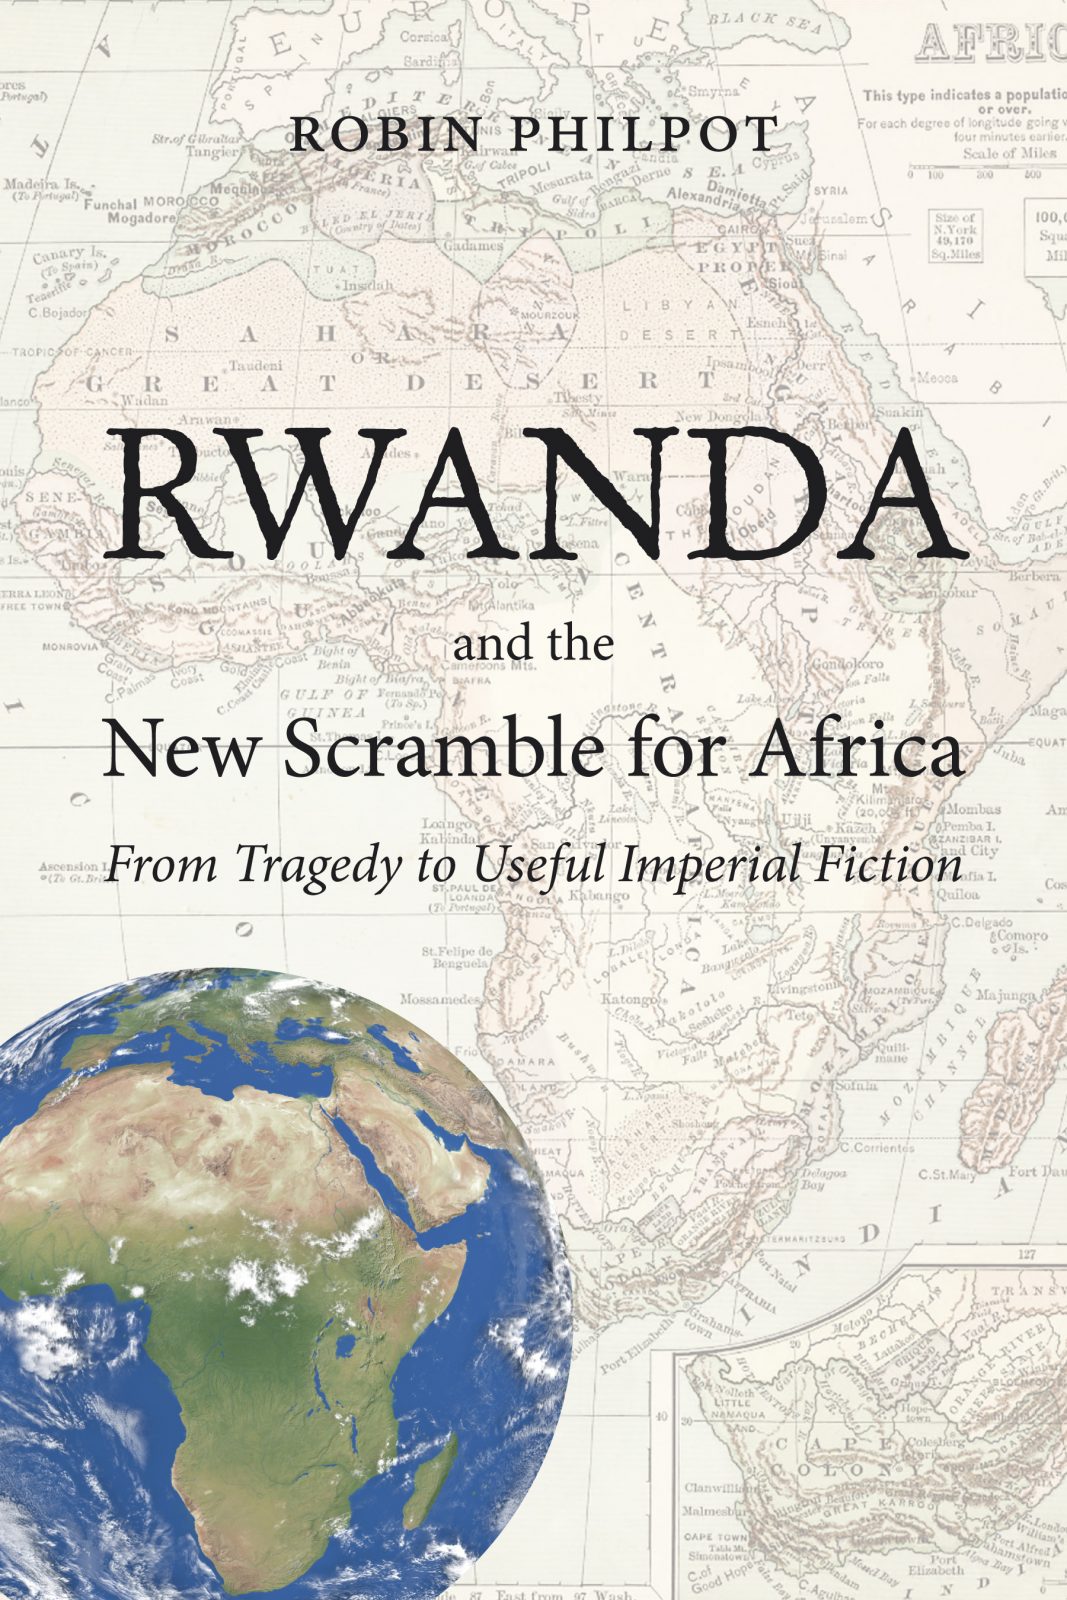 Rwanda and the New Scramble for Africa, by Robin Philpot